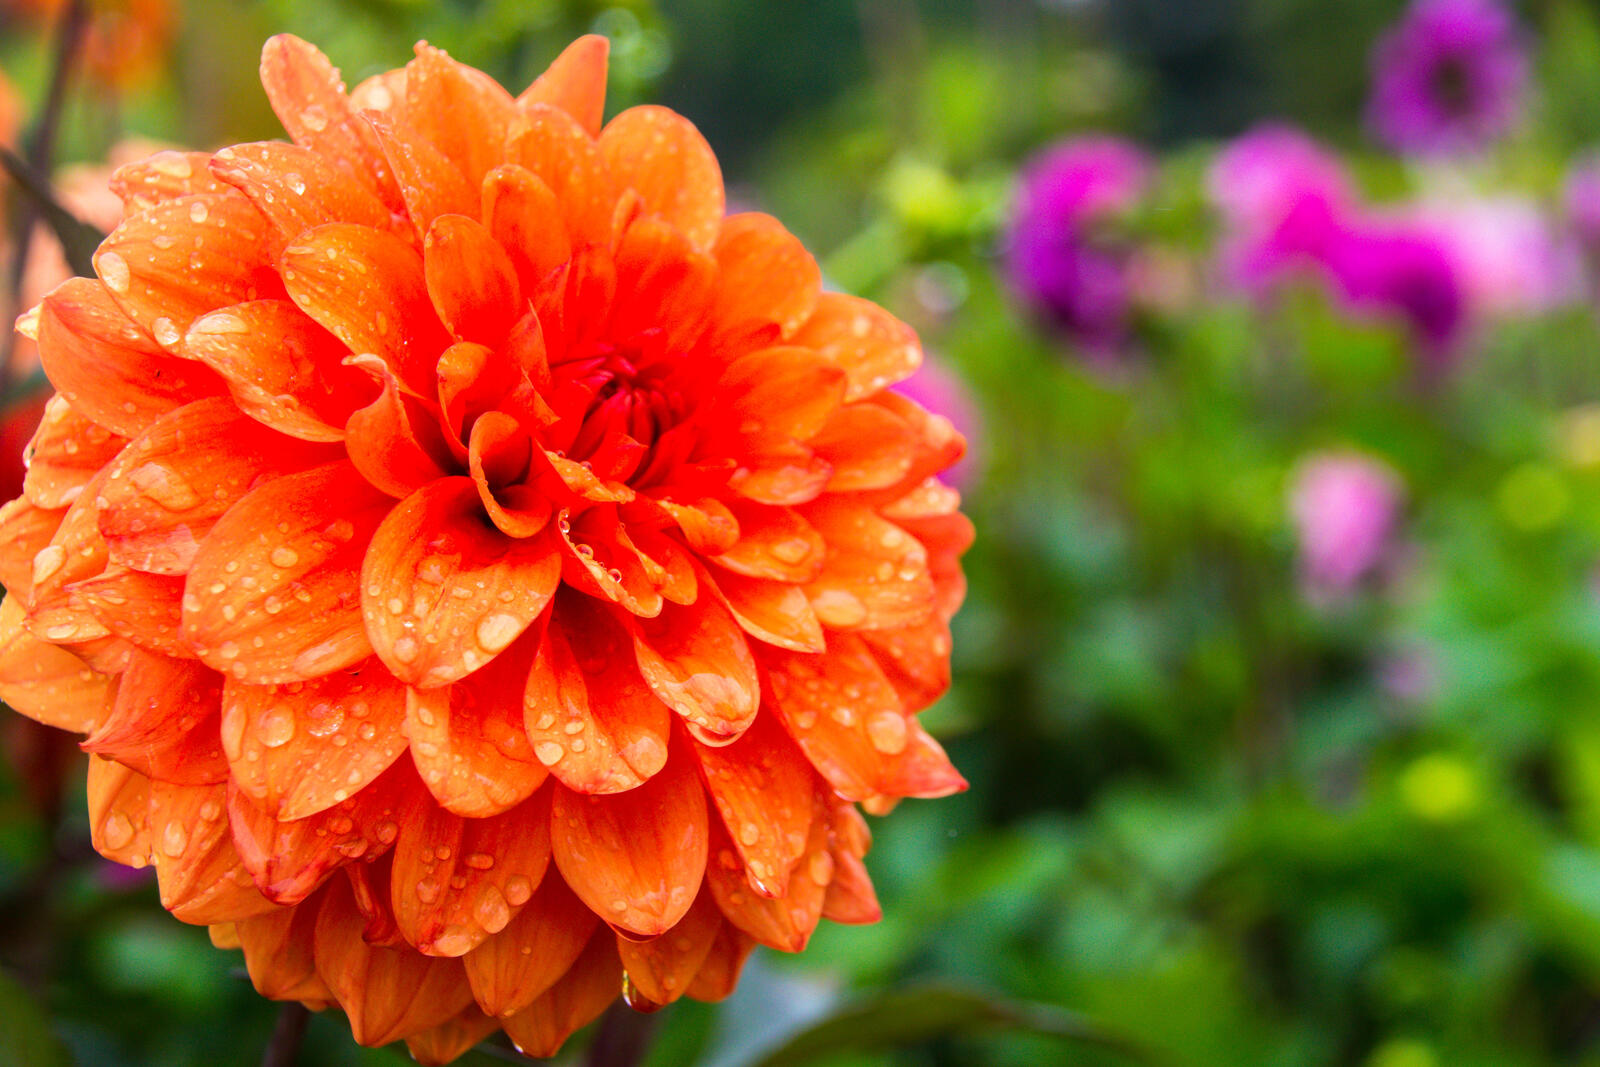 Free photo Orange dahlia flower with water droplets on the petals